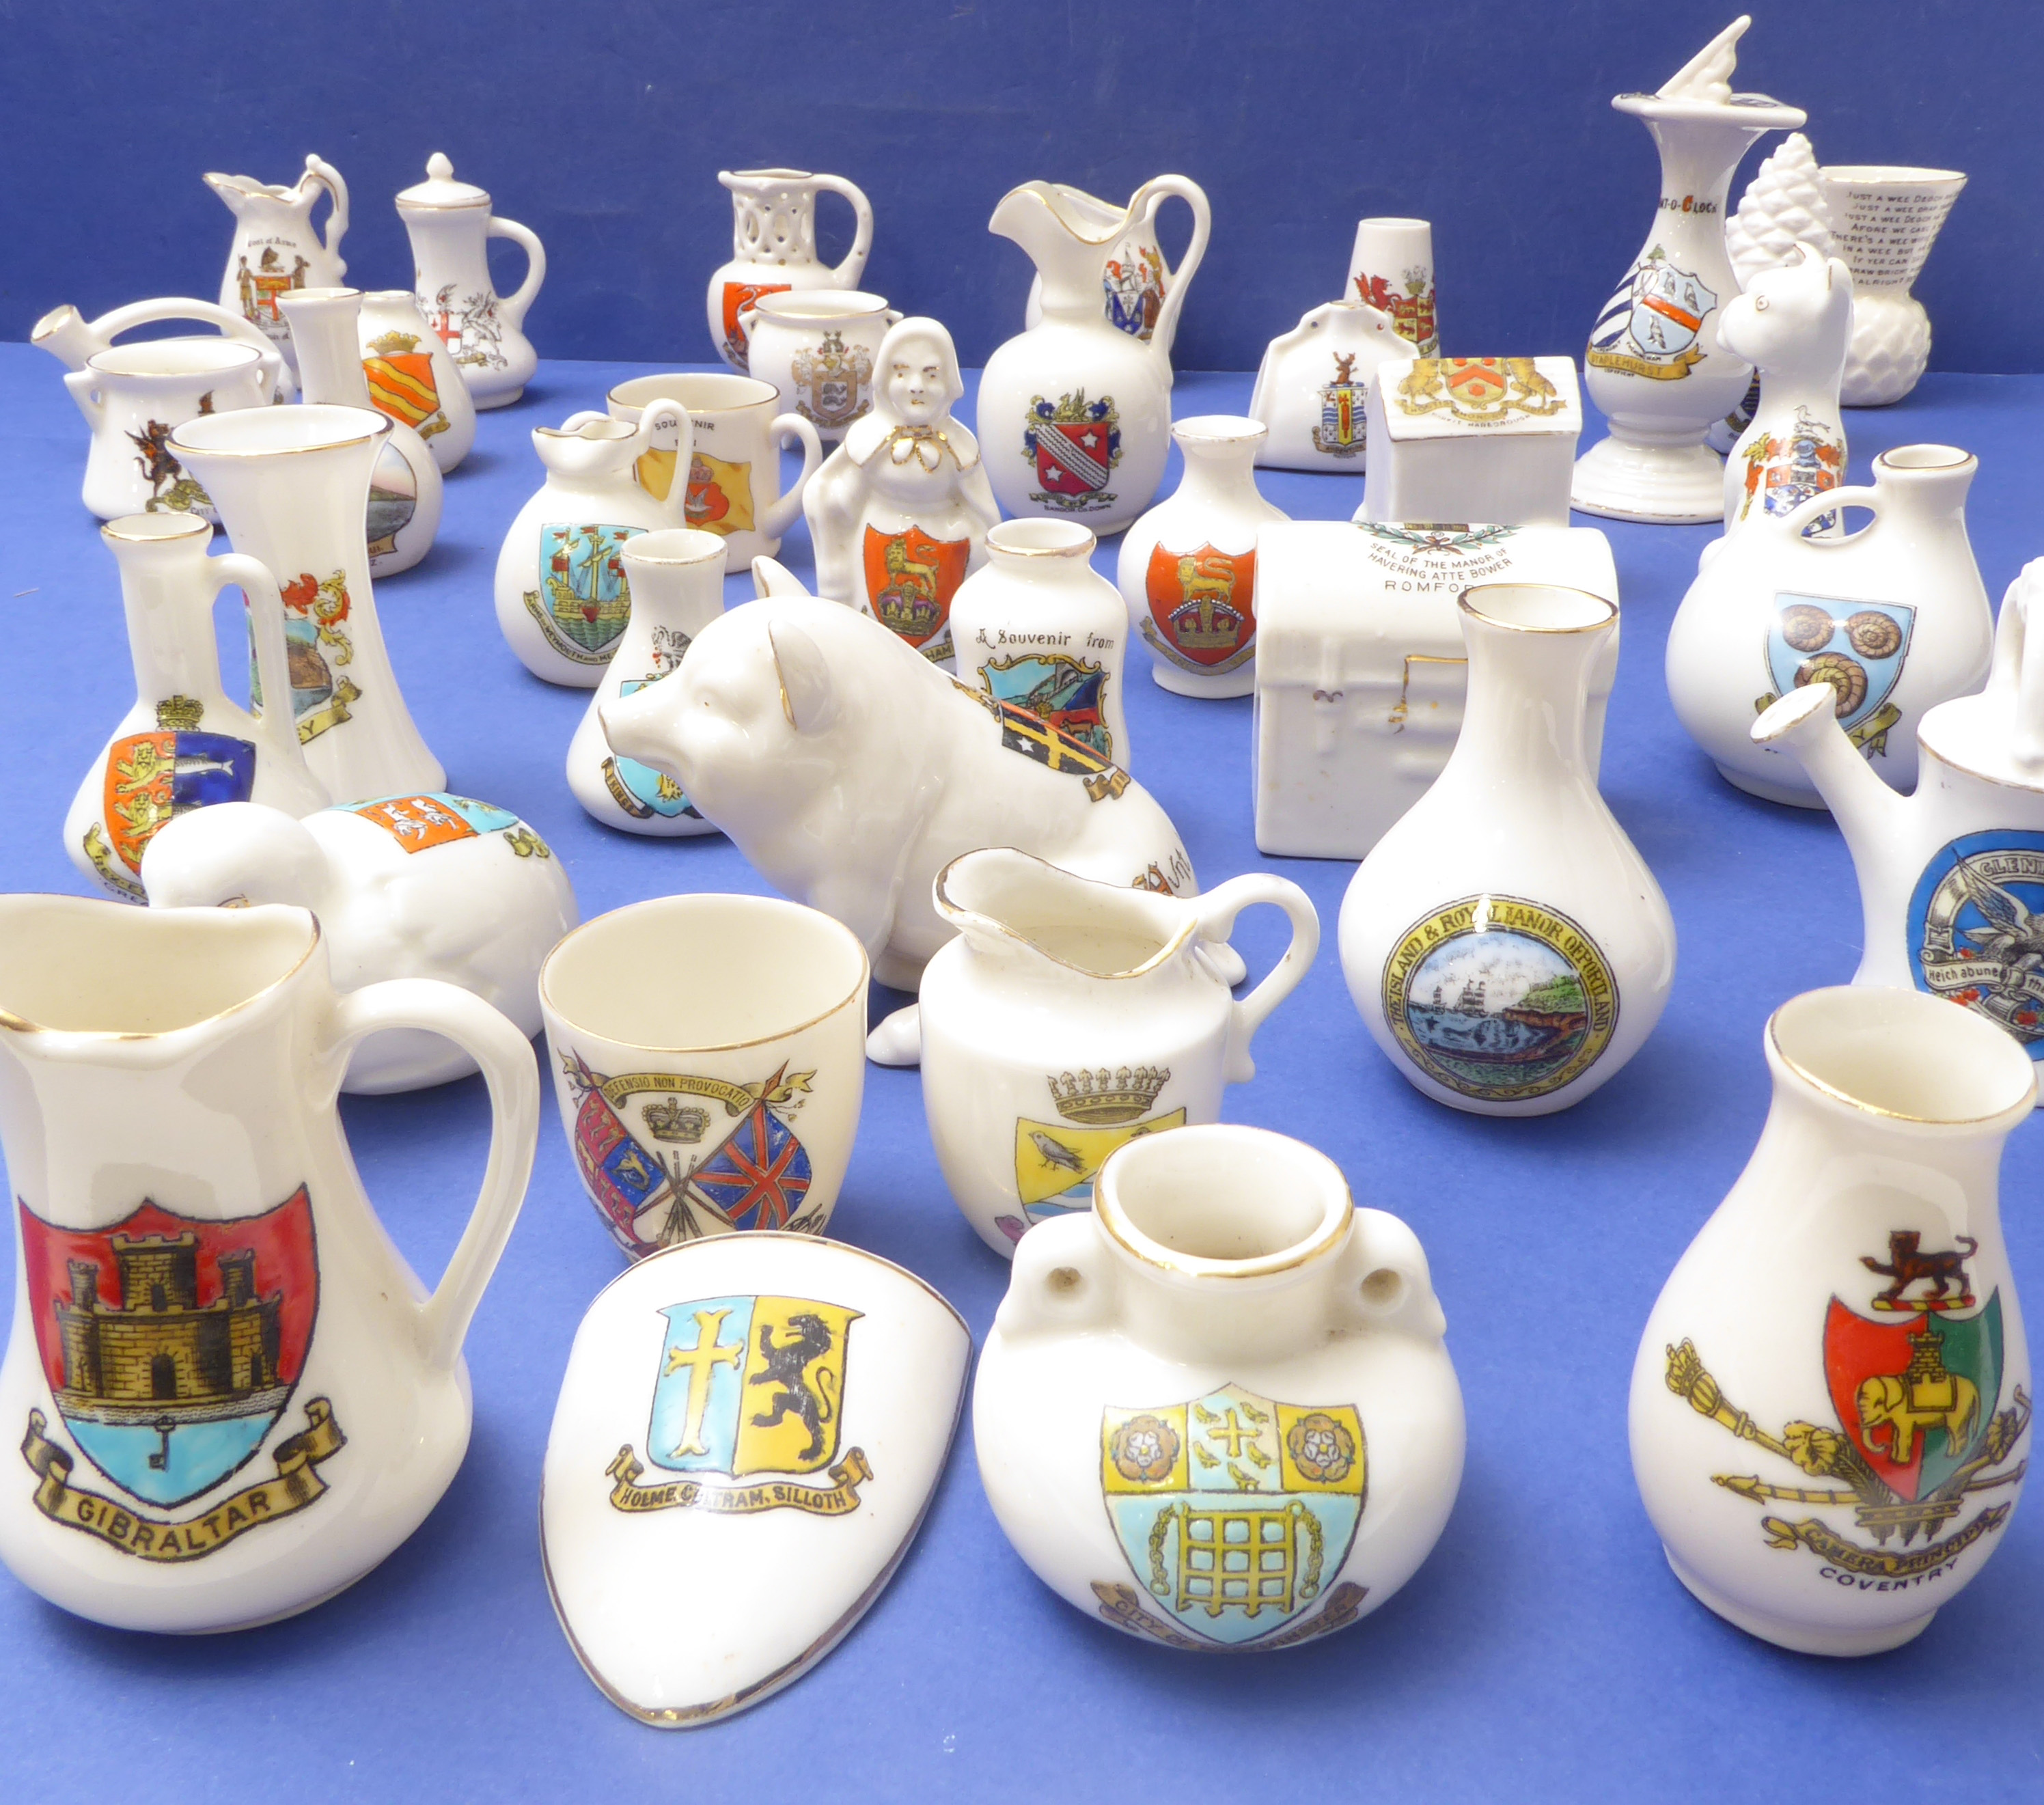 Approximately 39 pieces of porcelain crestware to include WH Goss, Grafton China, Victoria China and